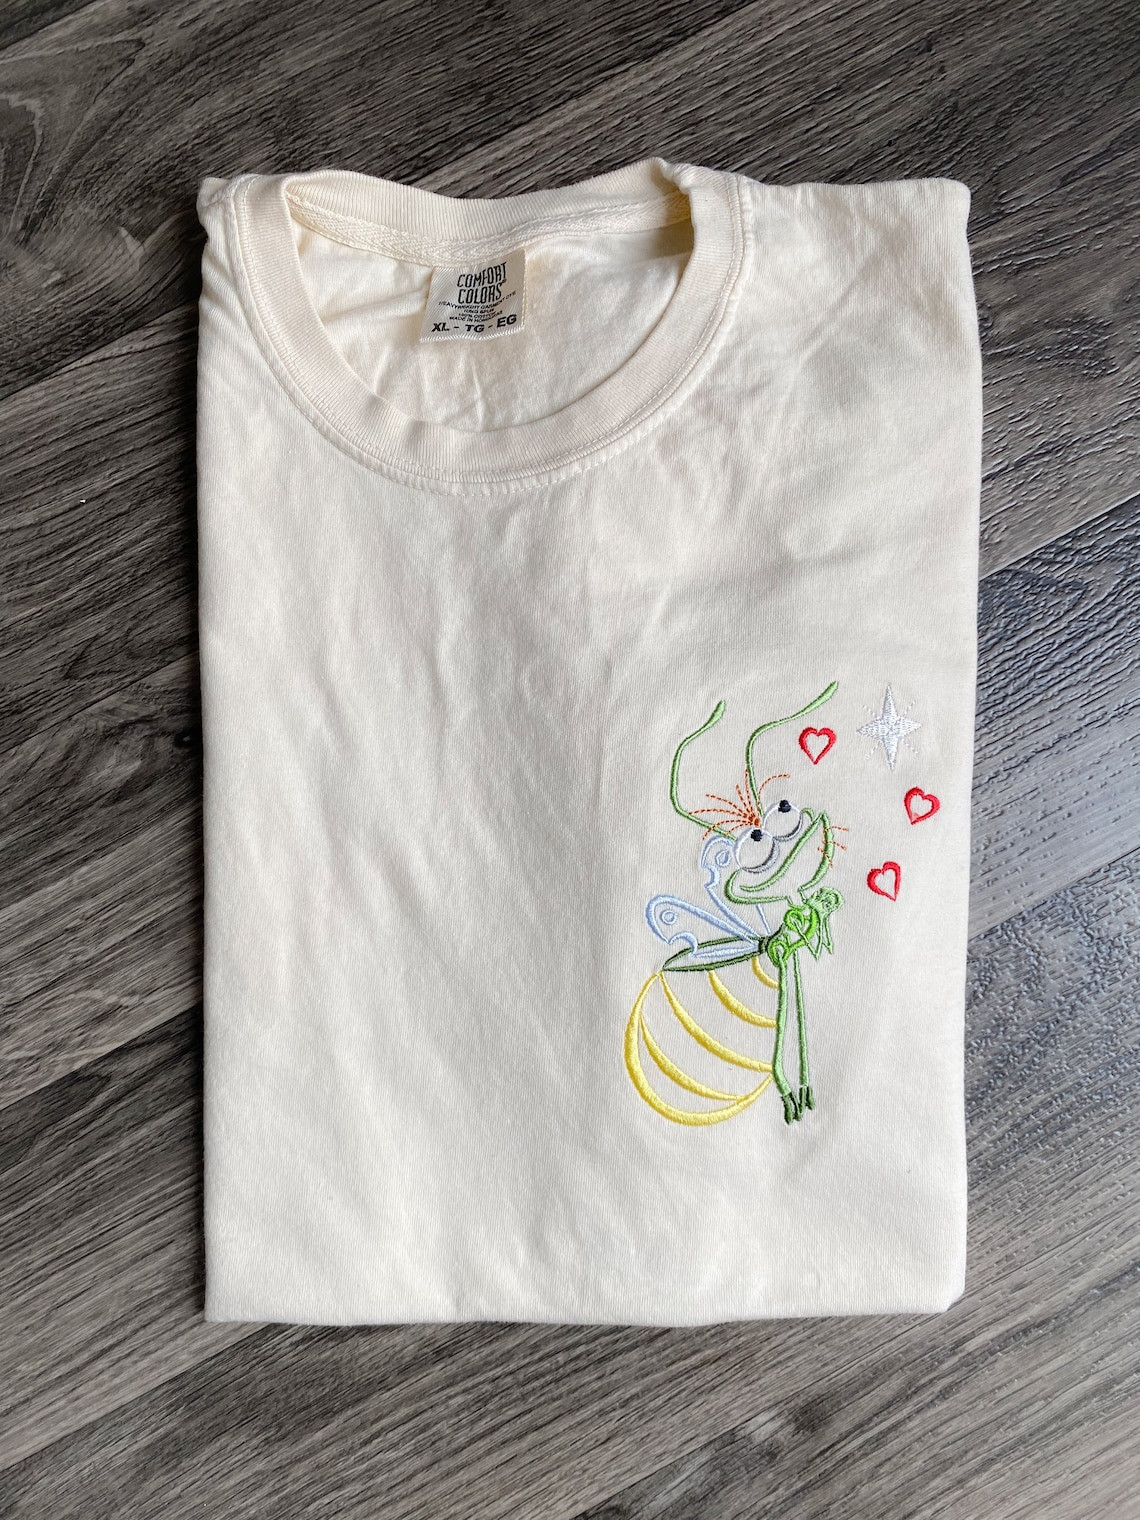 Ray And Evangeline Princess And The Frog Embroidered Shirt Disney Embroidered T Shirt Disney World Disneyland Embroidered T Shirt